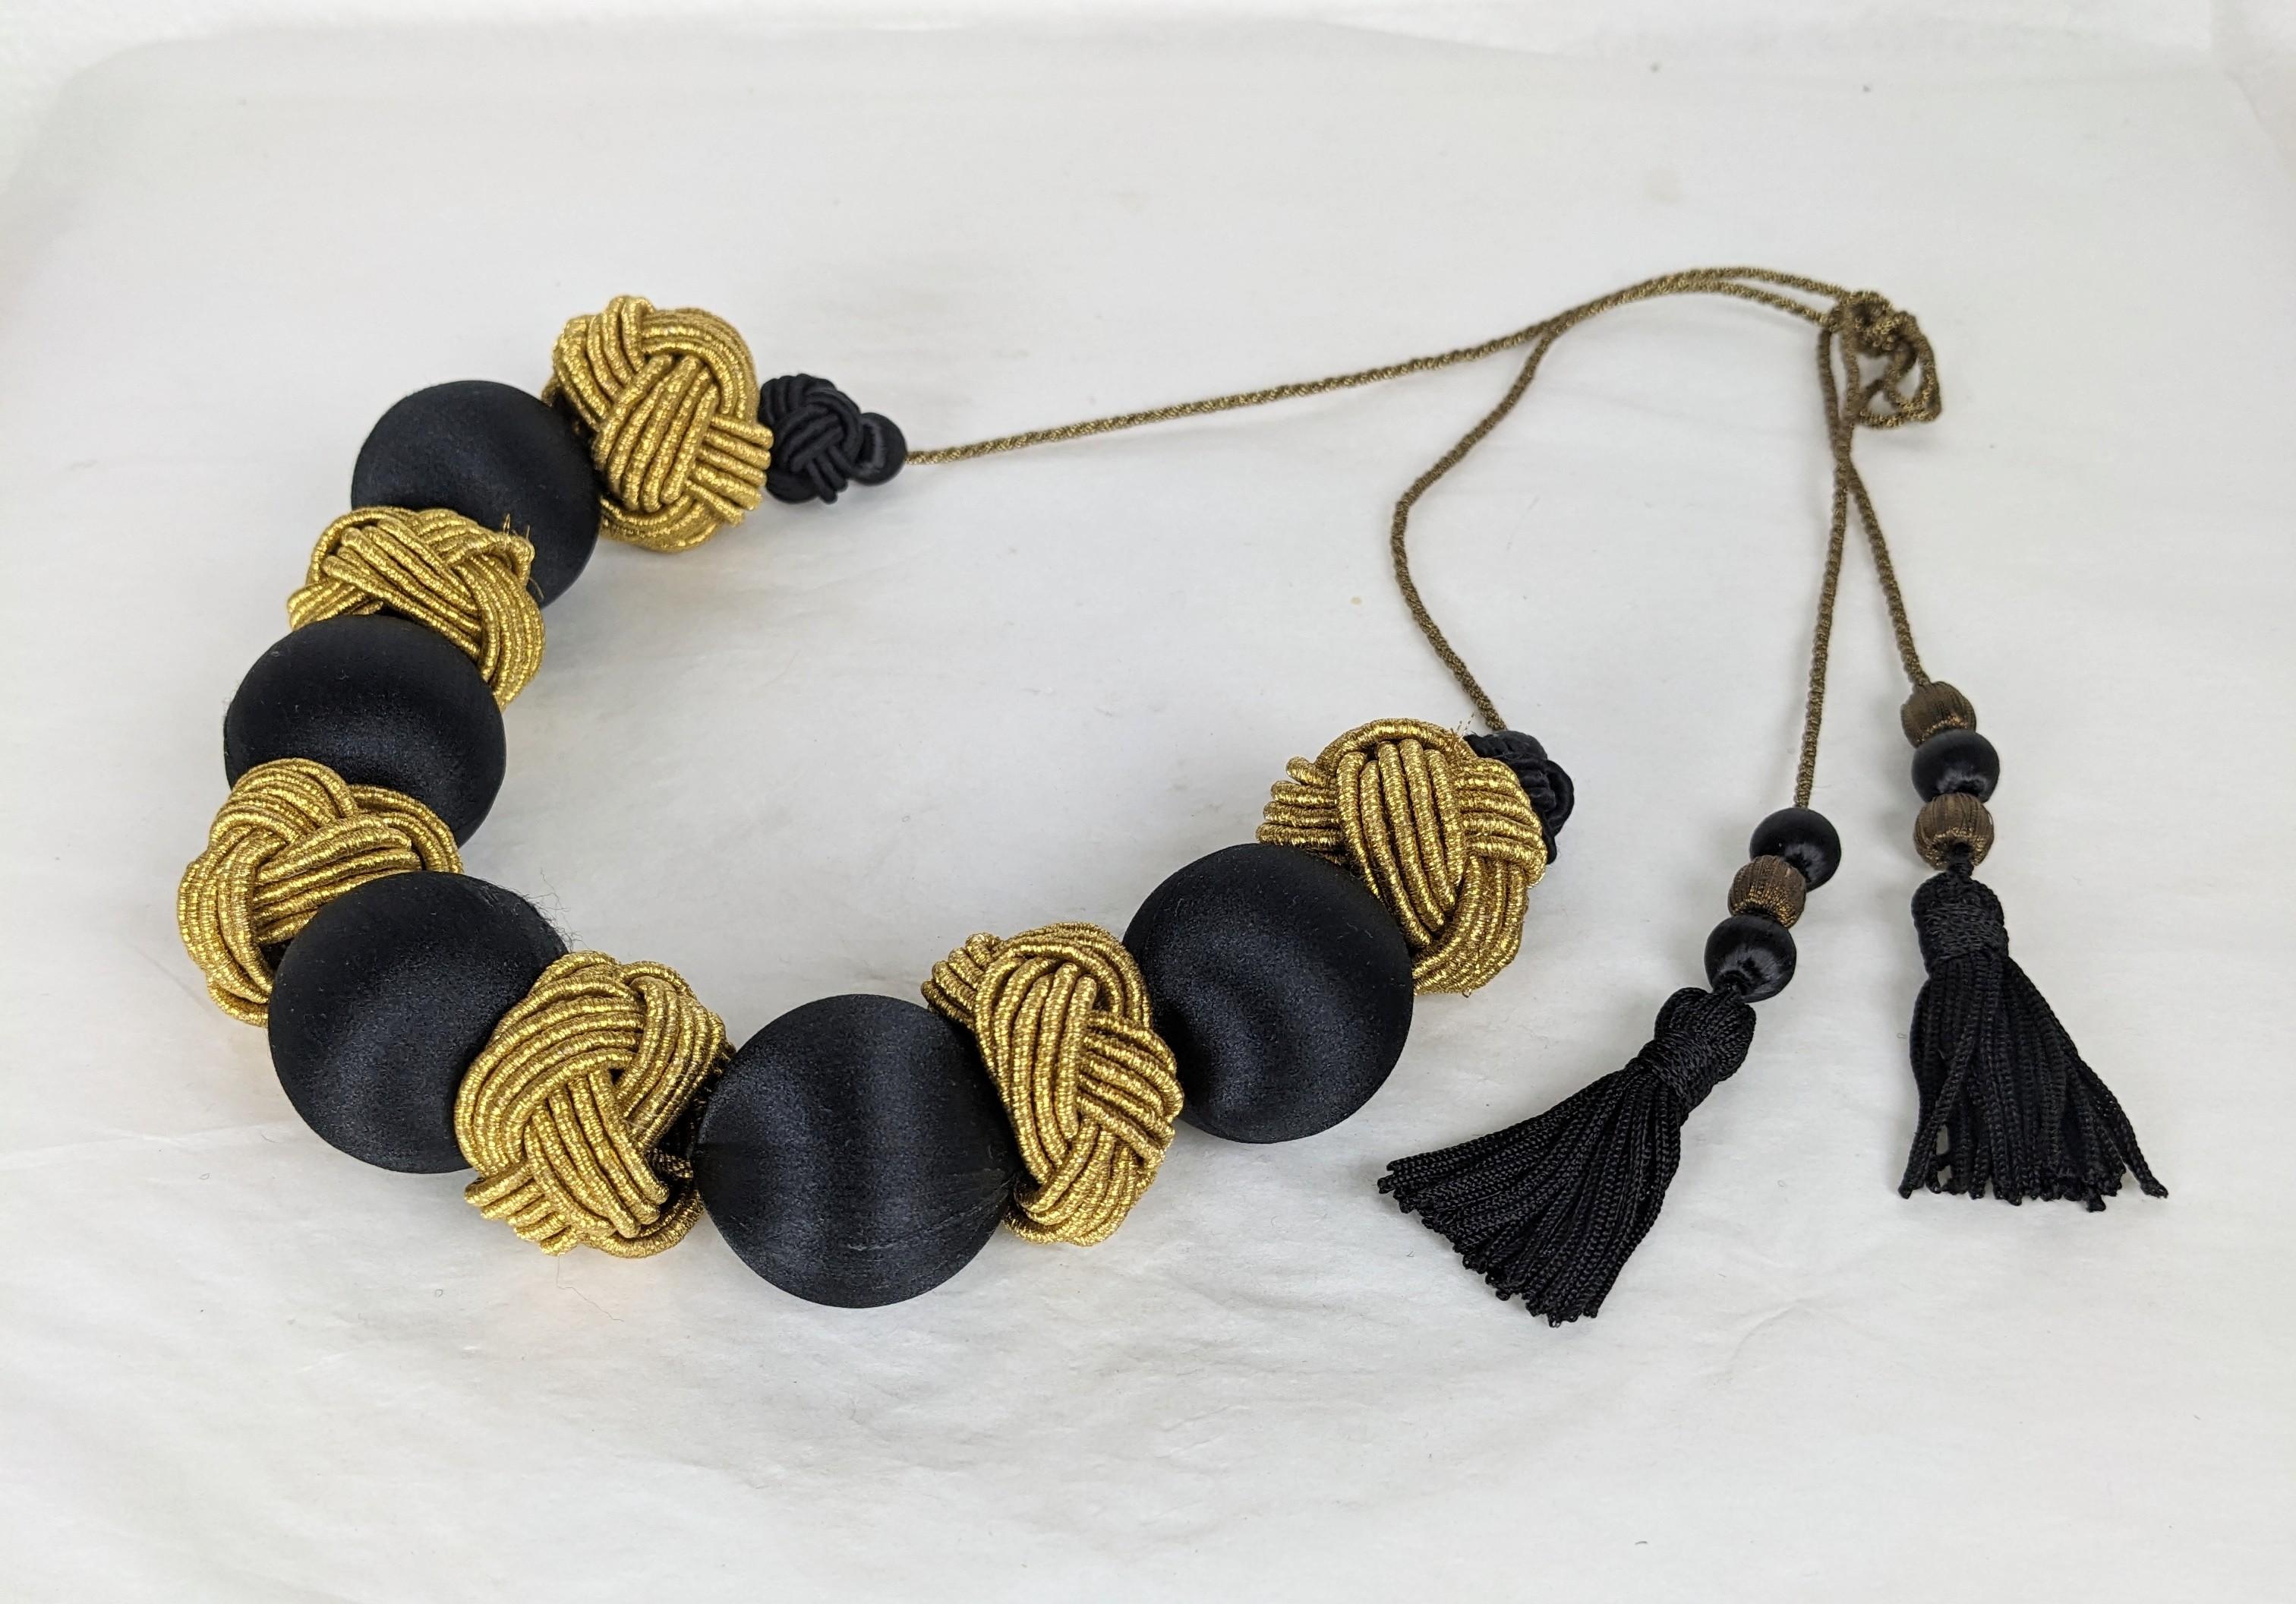 Yves Saint Laurent Lavish Haute Couture Passementerie Necklace, F/W 1977 In Excellent Condition For Sale In New York, NY